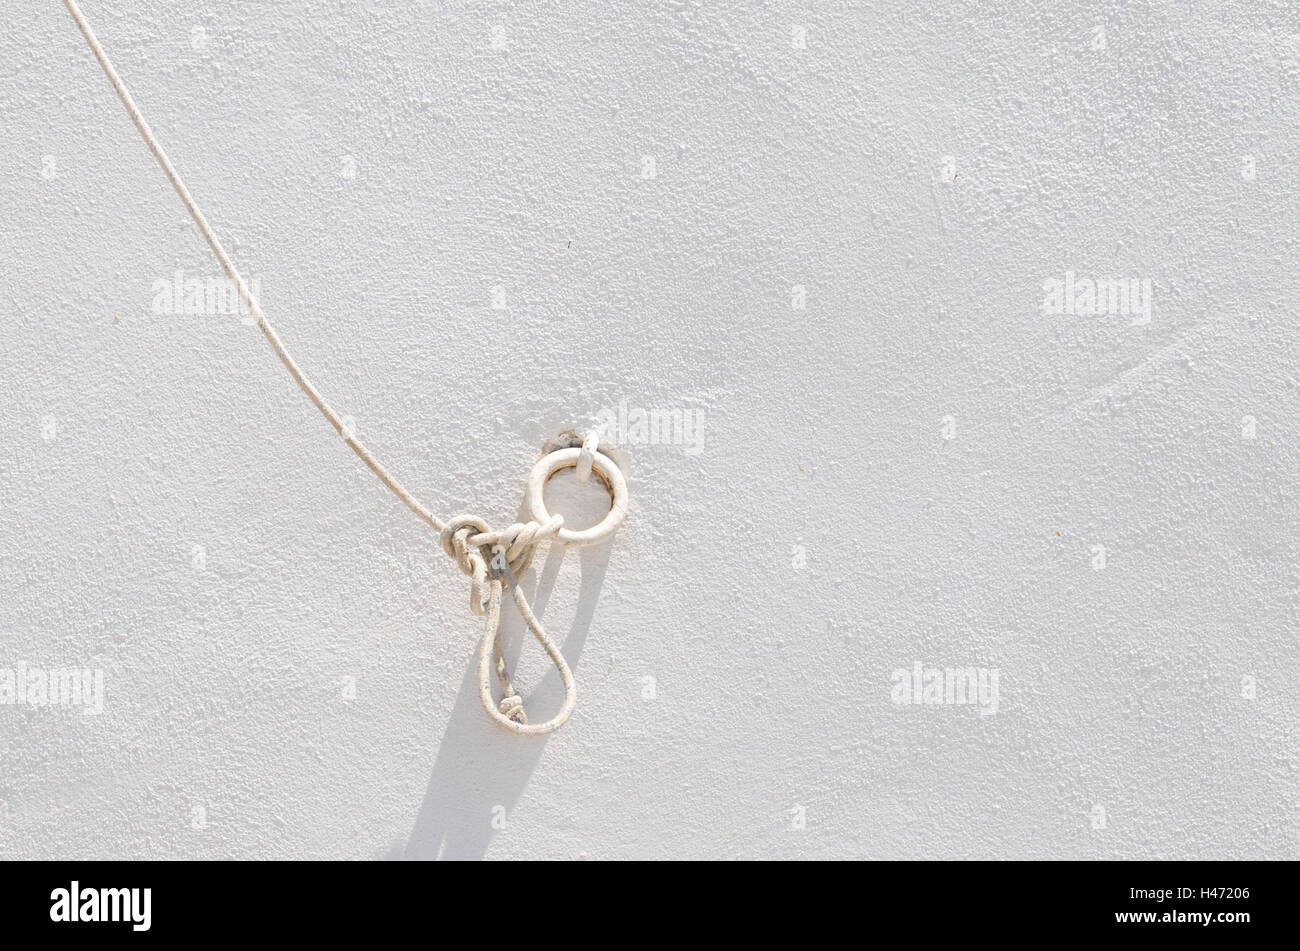 String und eisernen Ring an Wand, Insel Sifnos, Cyclades, Griechenland, Stockfoto